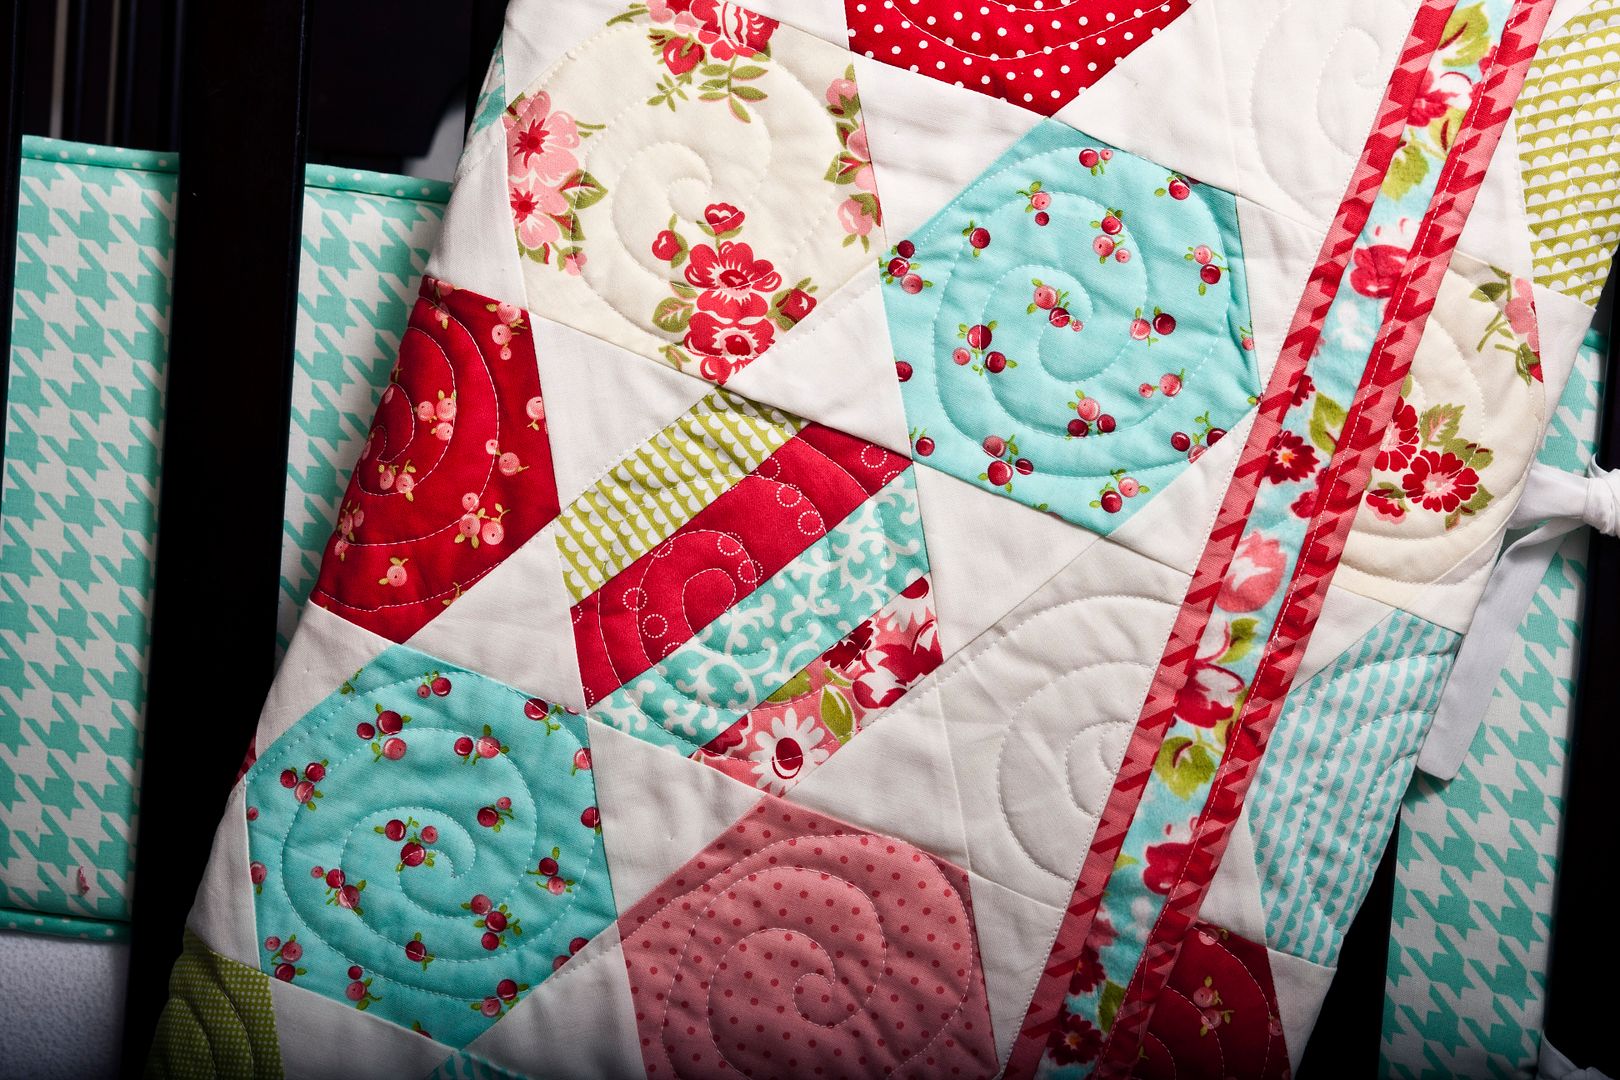 Juggle hexagon quilt PDF pattern by Thimble Blossoms. Makes a sweet baby quilt in these (primarily) Ruby fabric by Bonnie & Camille for Moda Fabrics.